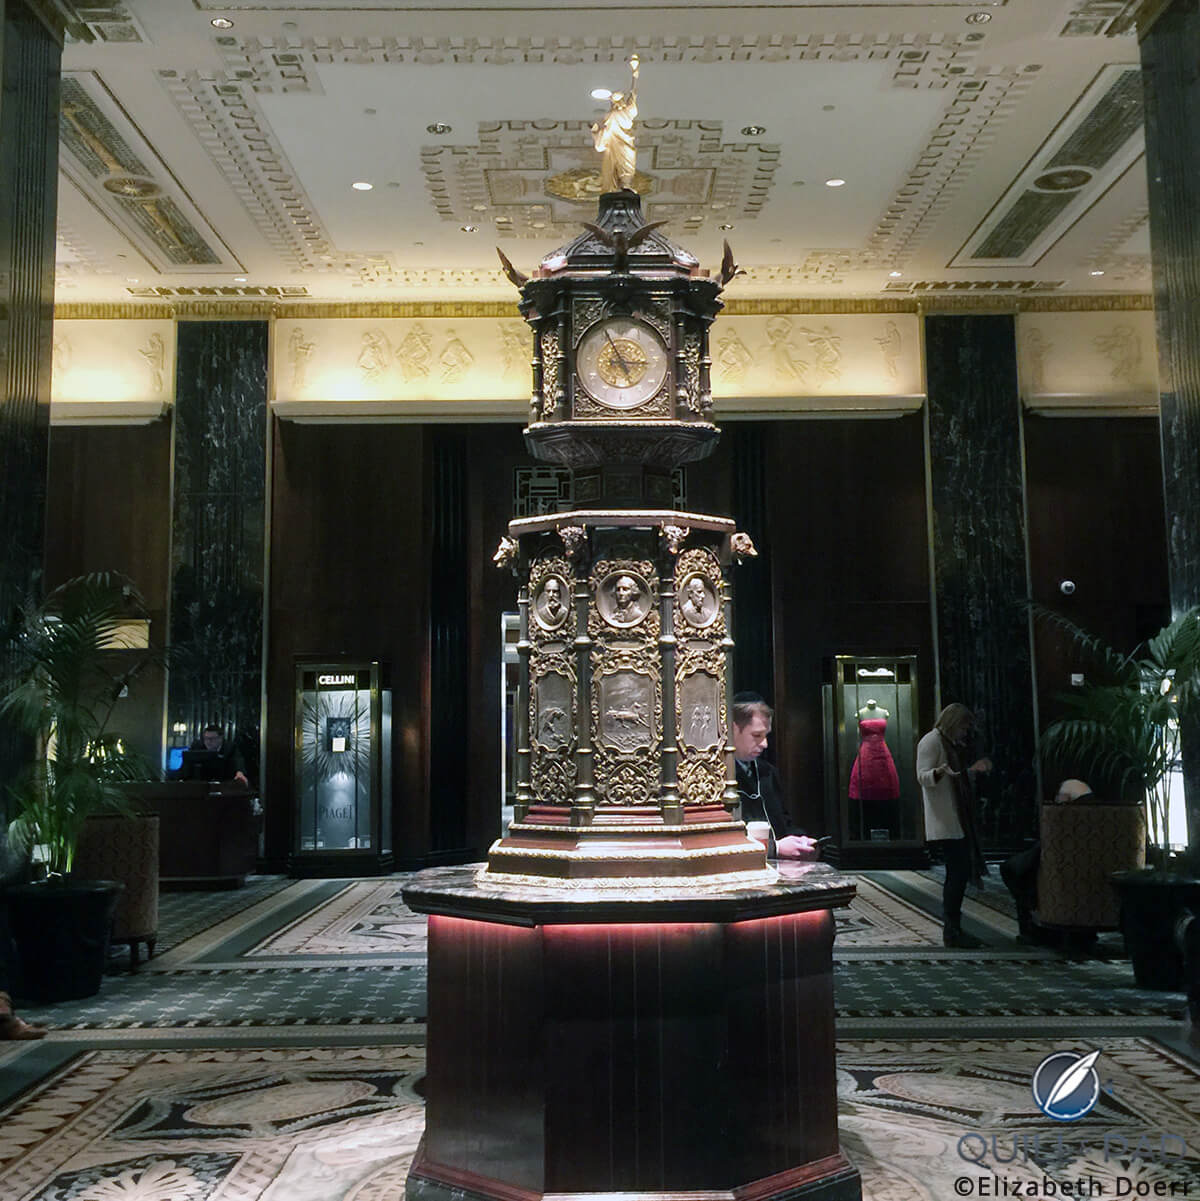 Clock in the lobby of the Waldorf Astoria hotel, New York